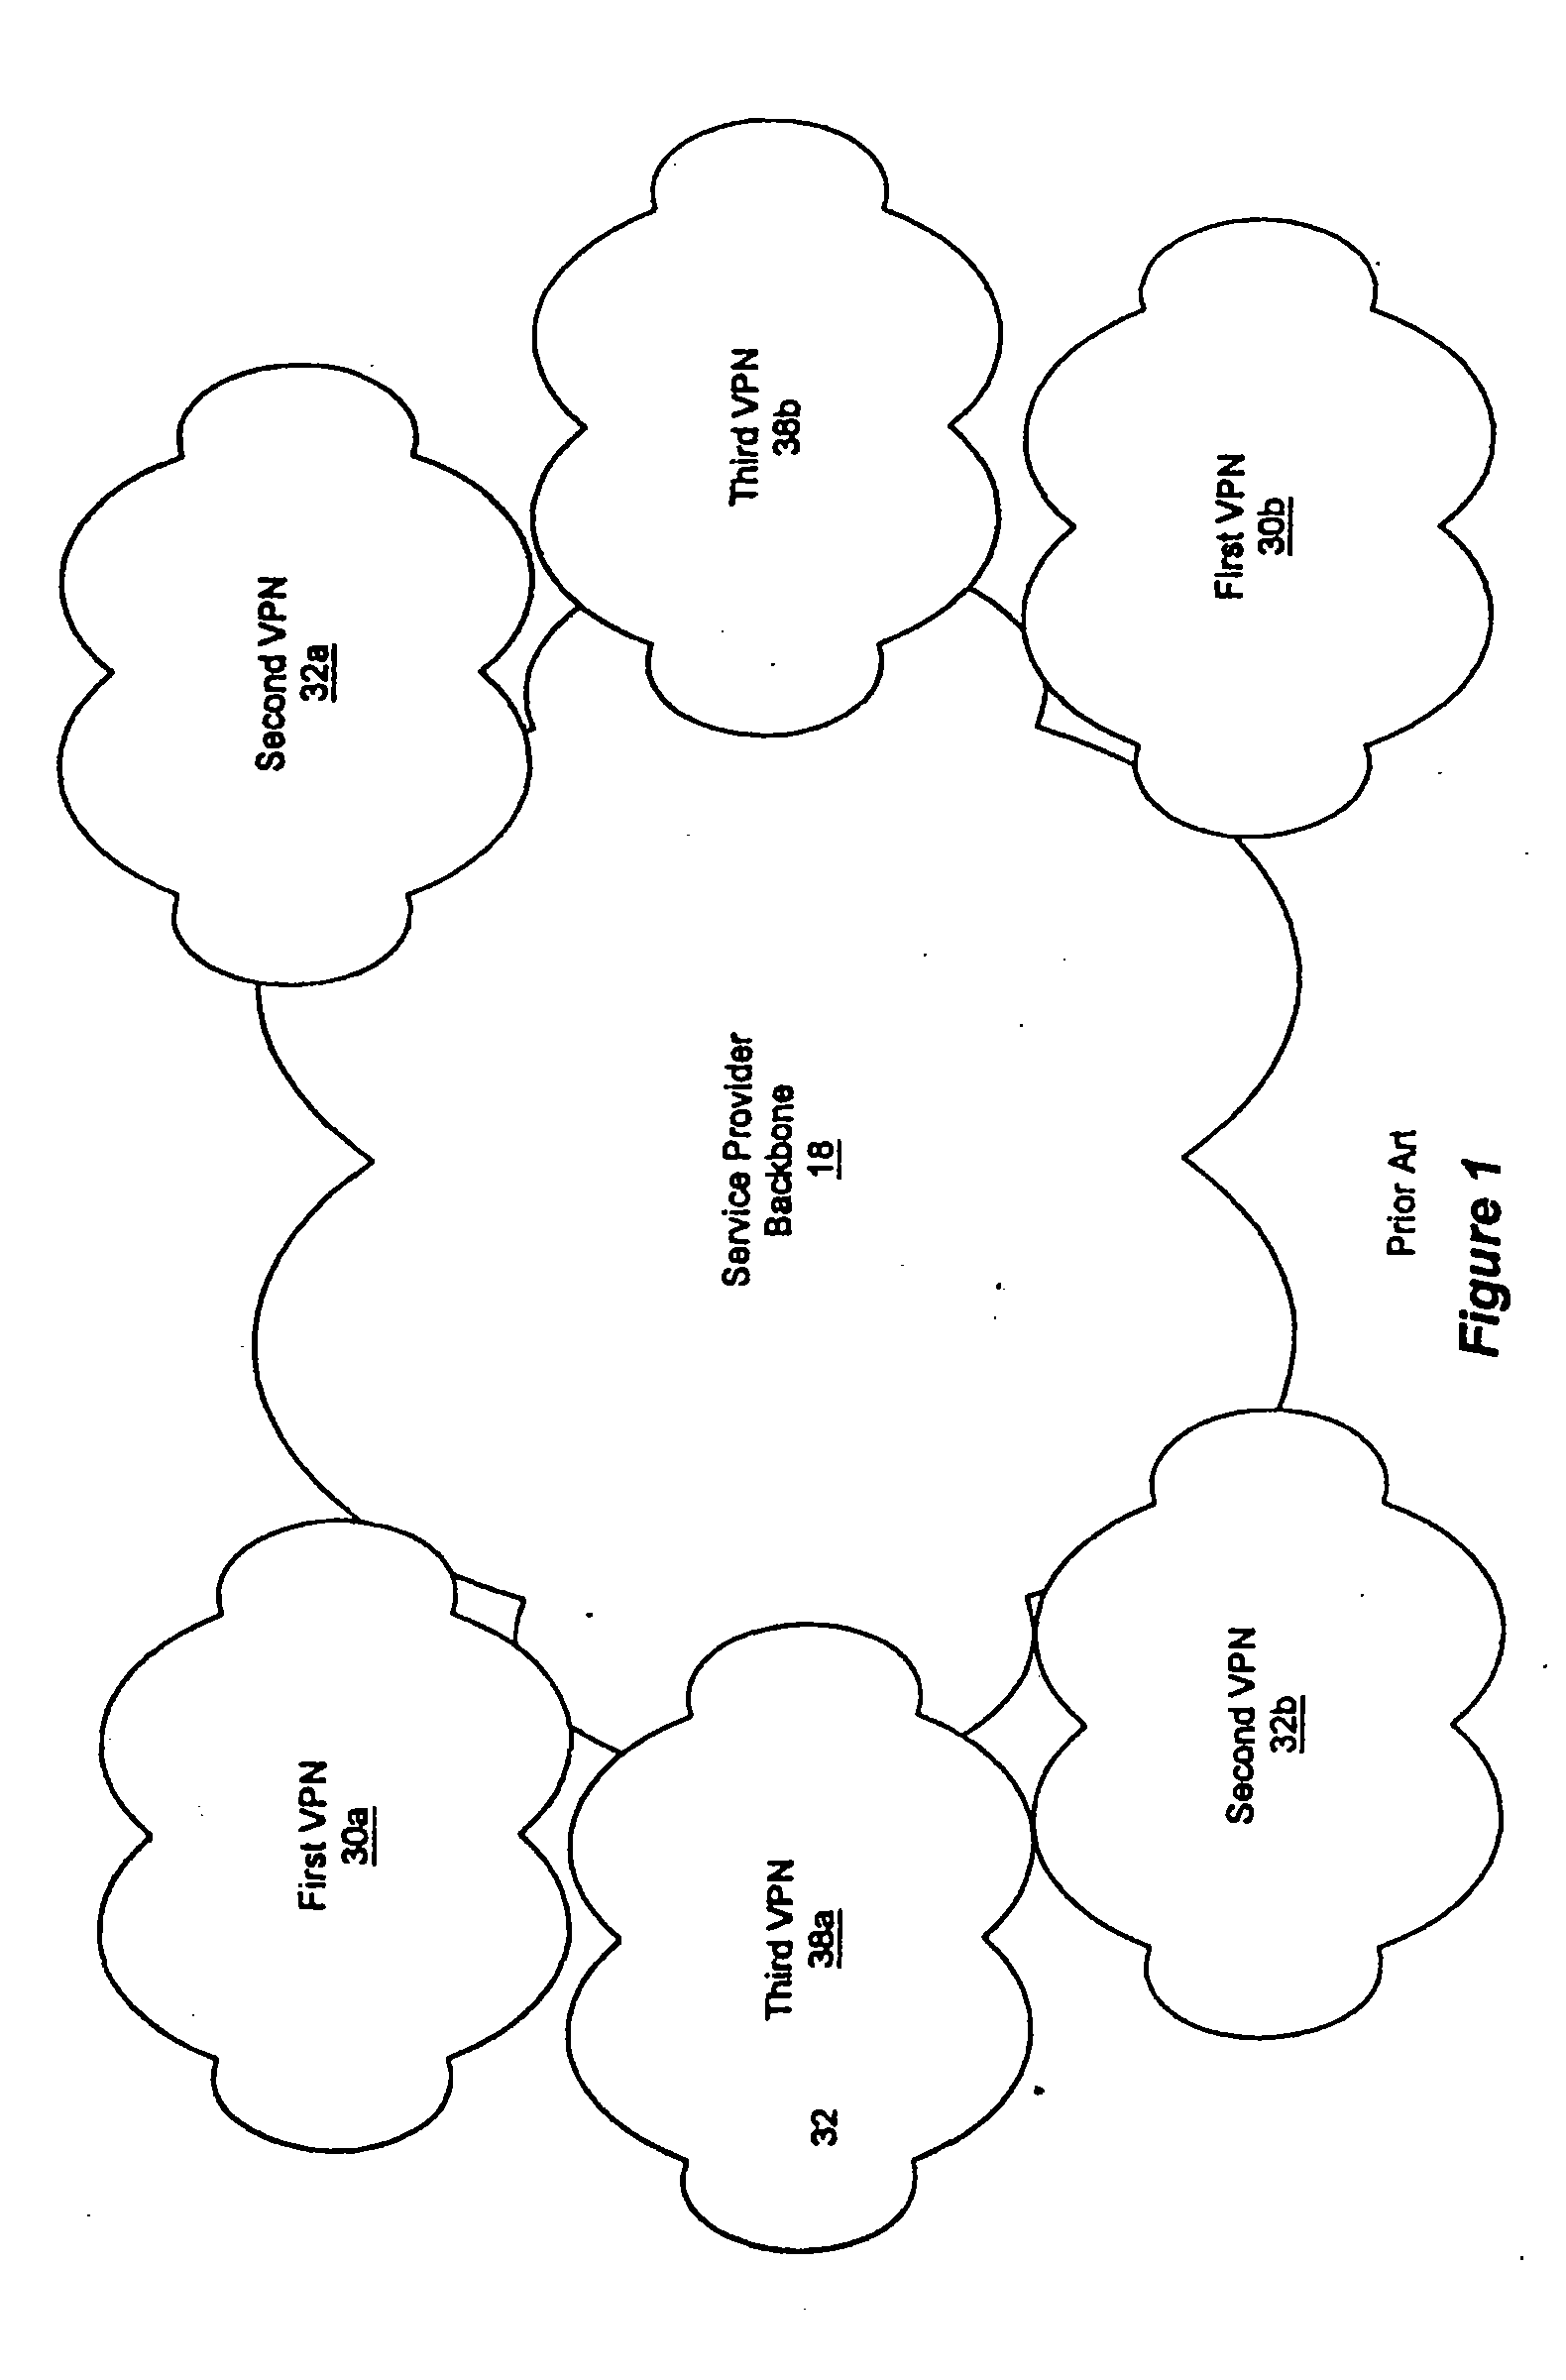 Fairness of capacity allocation for an mpls-based VPN